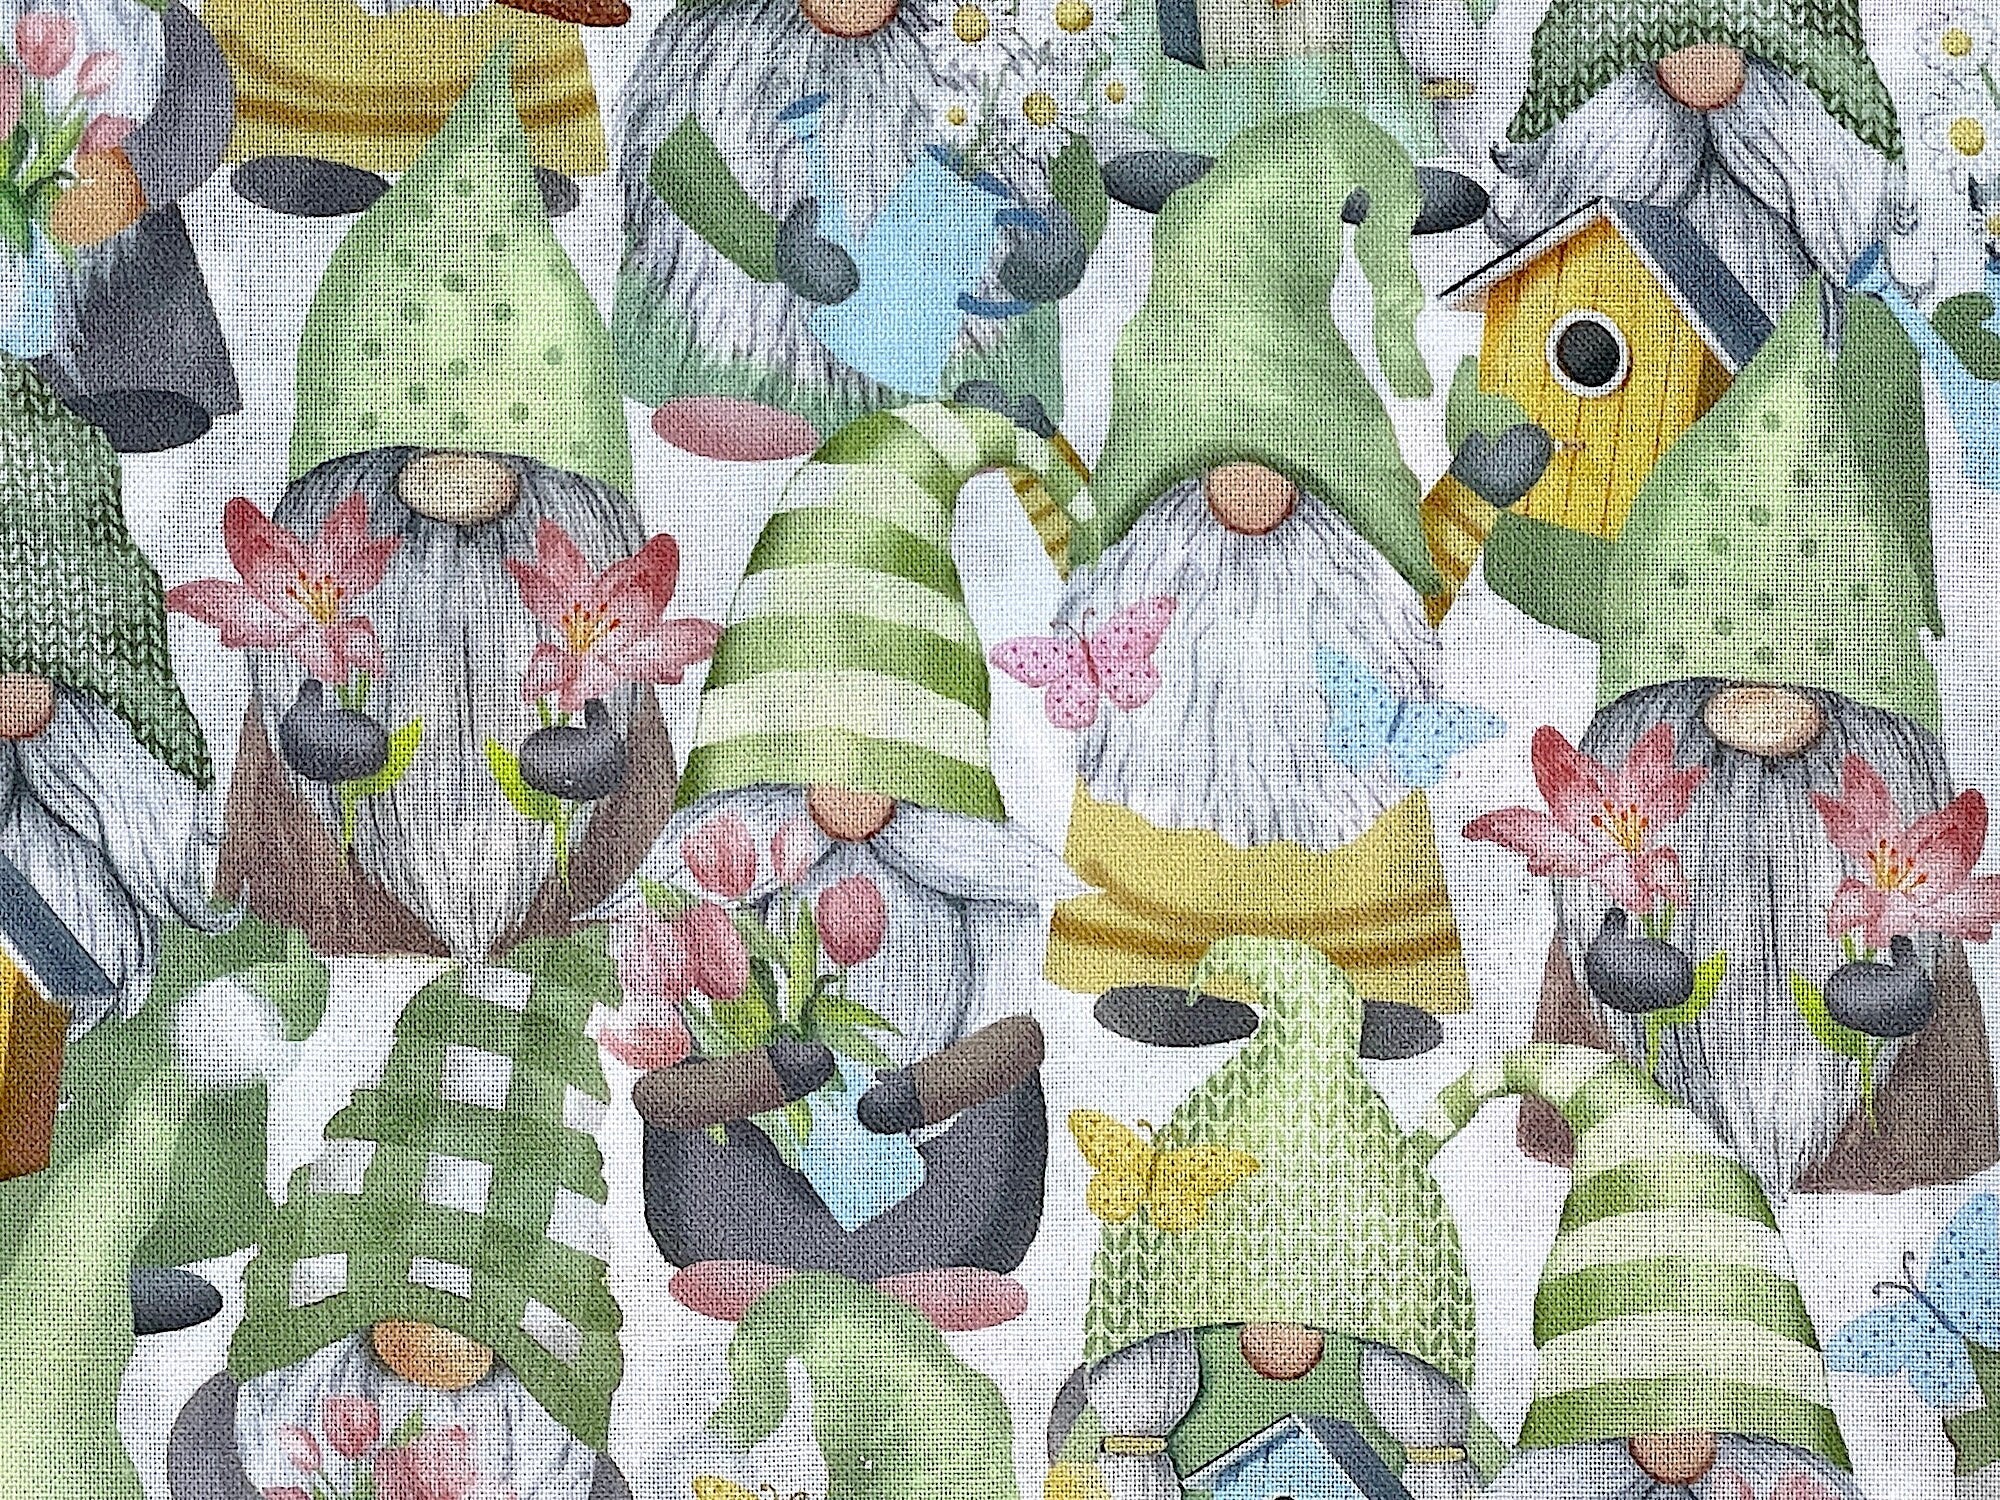 Close up of gnomes holding flowers.